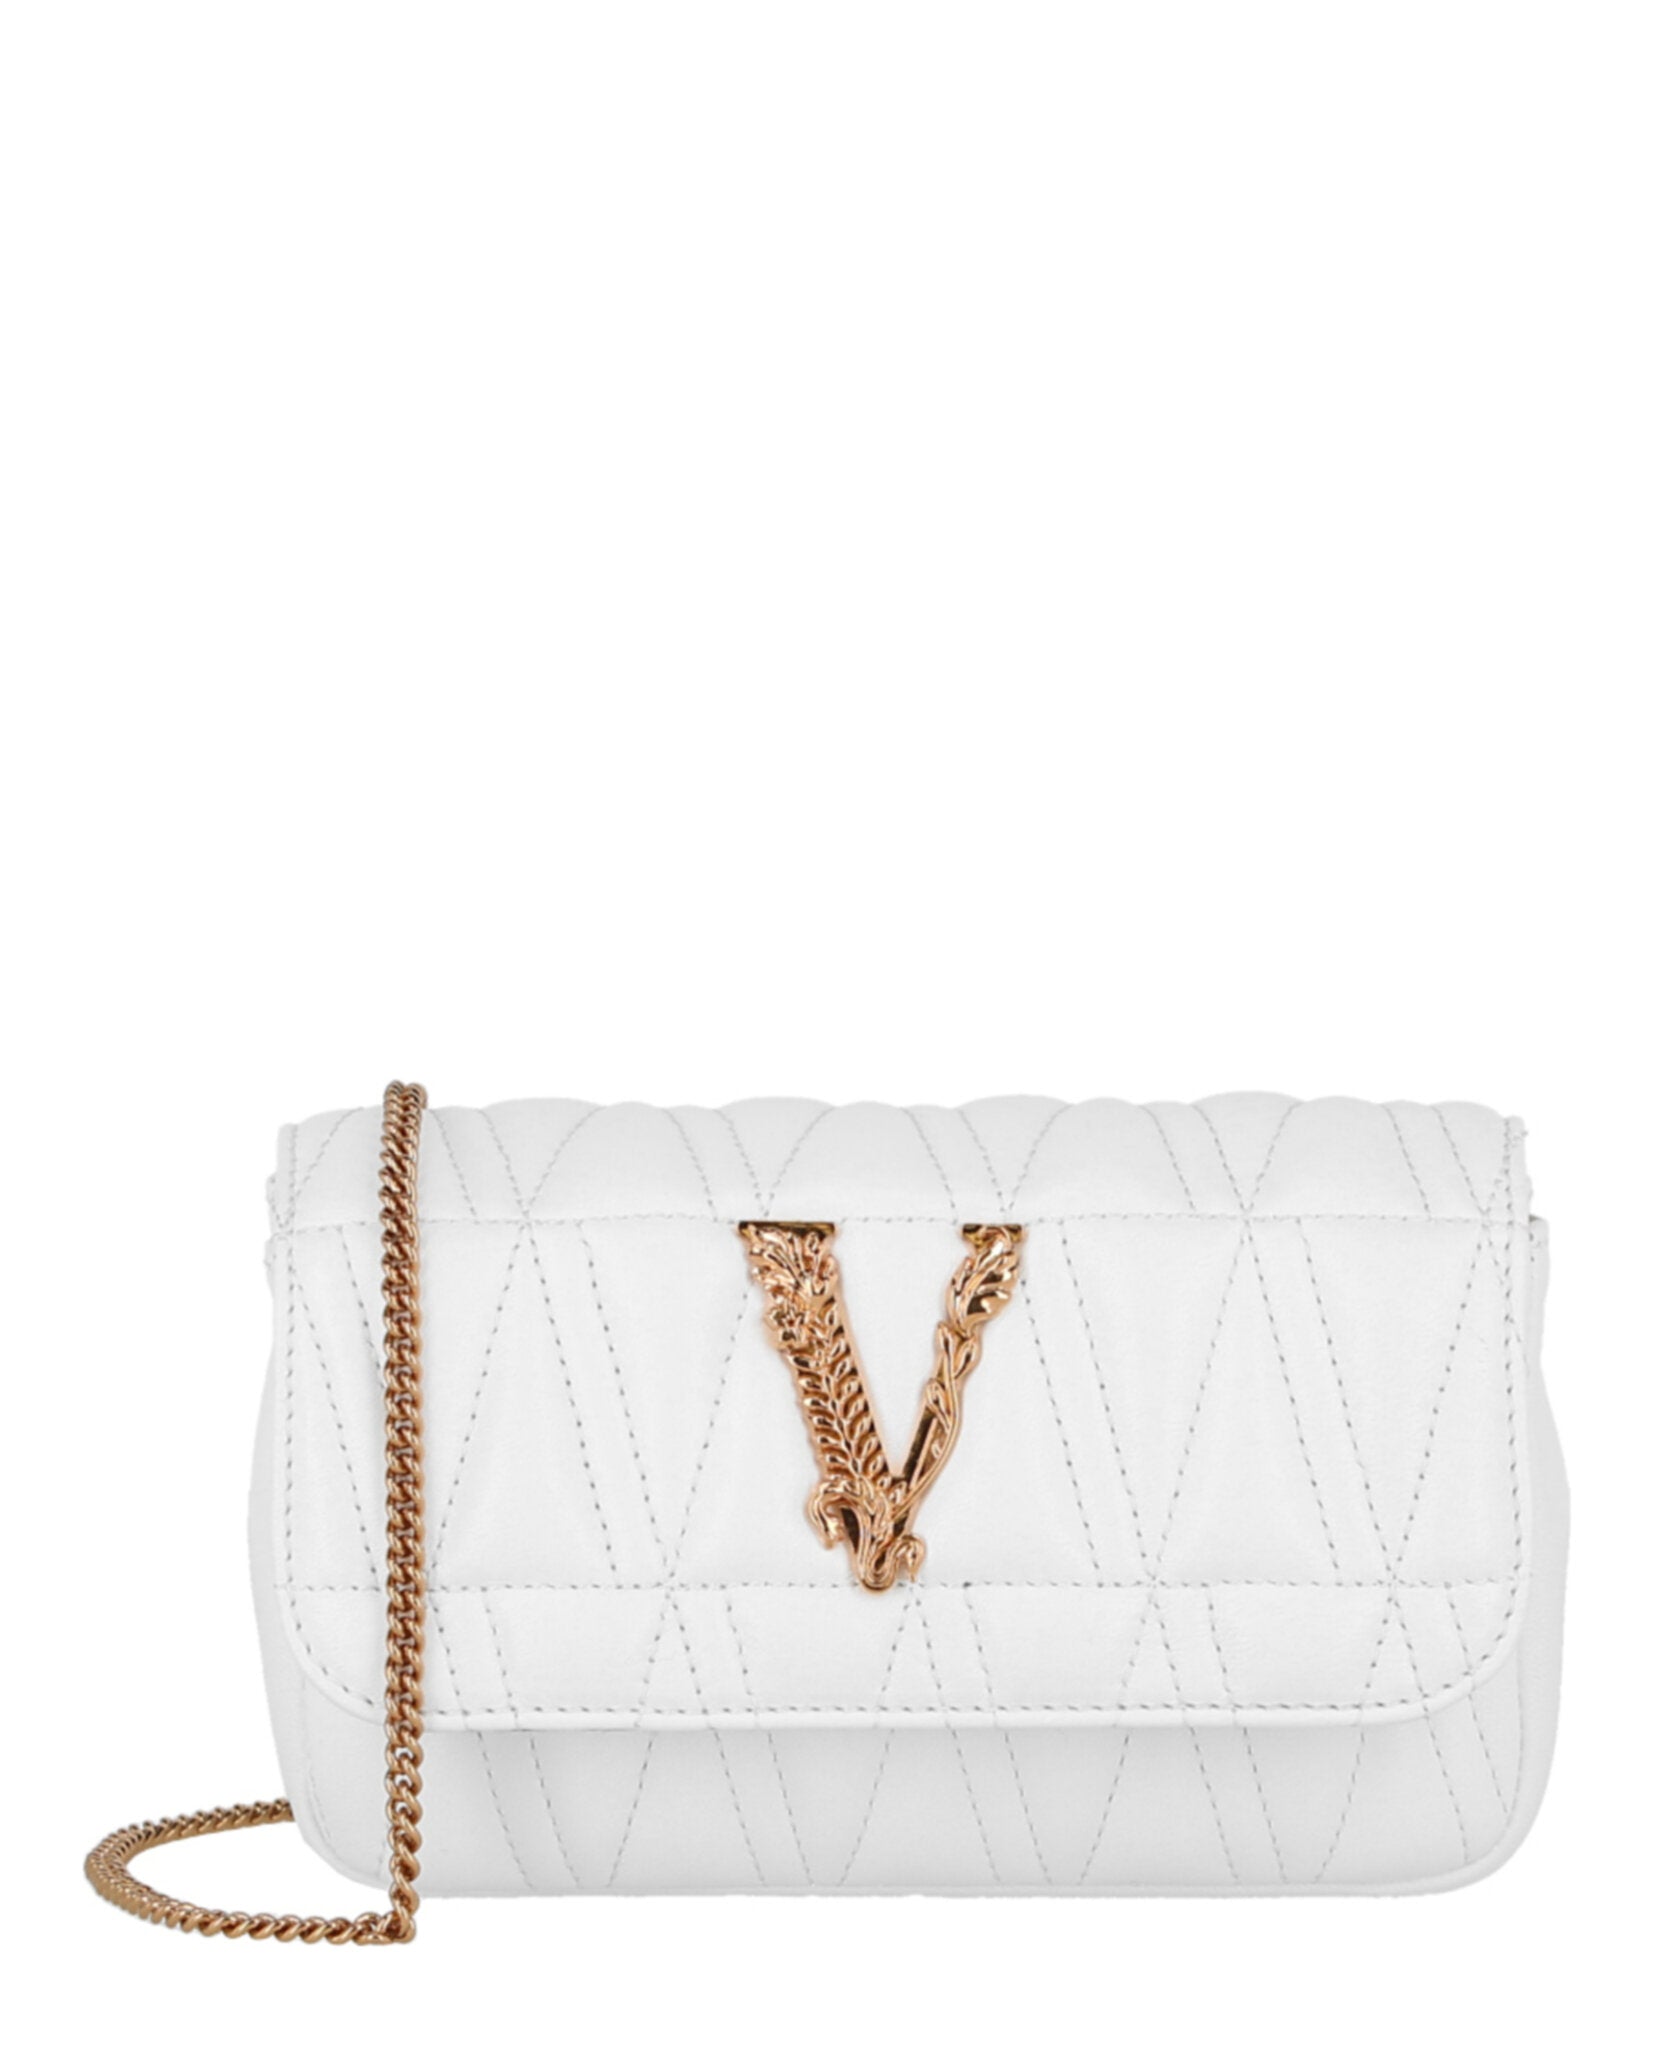 VERSACE VIRTUS QUILTED LEATHER CROSSBODY BAG